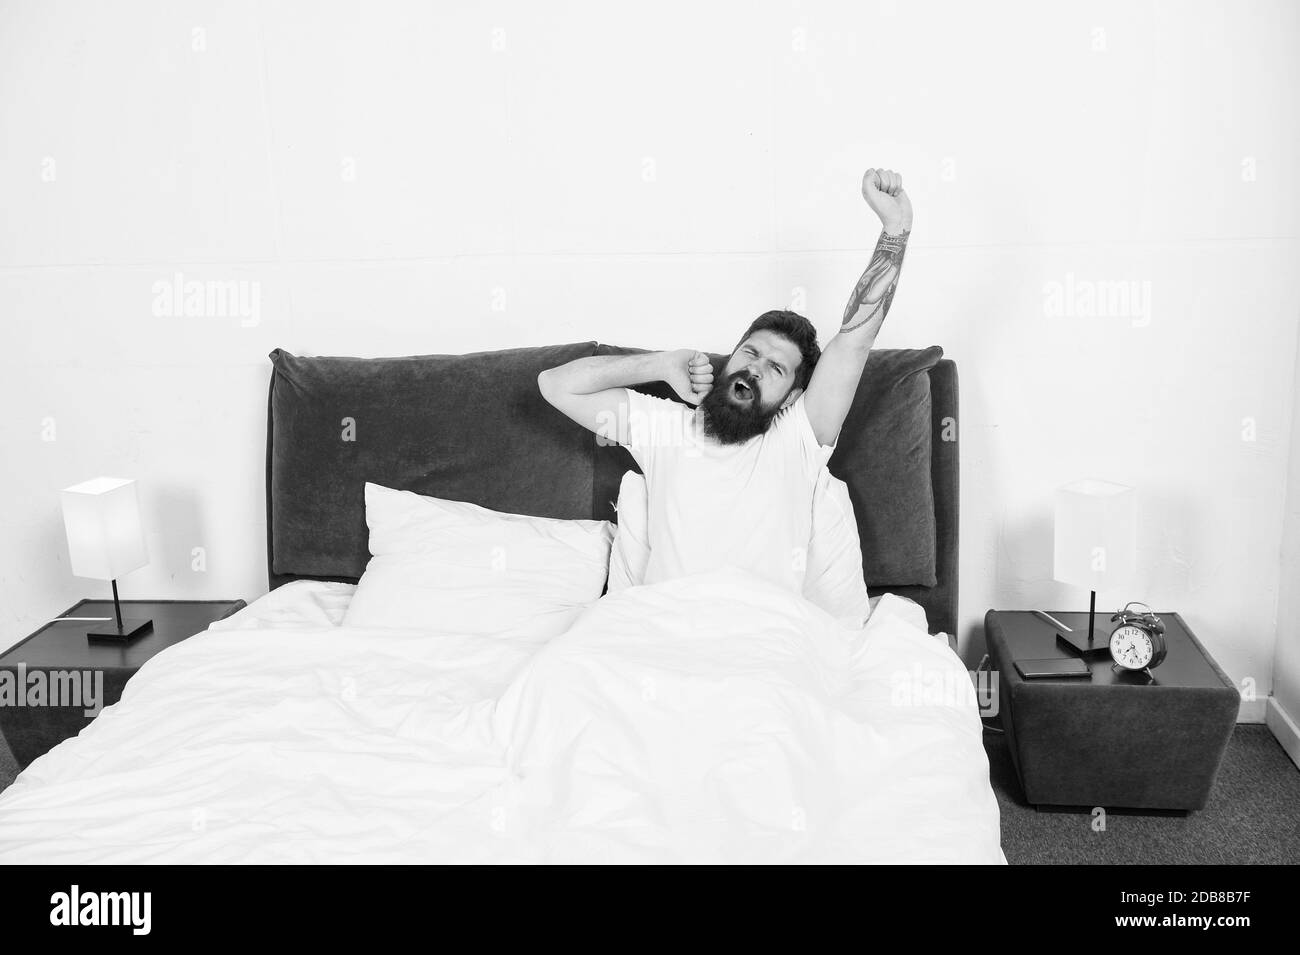 Sleepy early morning. Bearded with sleepy look in morning. Sleepy hipster stretch and yawn in bed. Wokeup sleepy. Awakening. Bedtime routine. Nap time. Feeling as though he got no sleep at all. Stock Photo